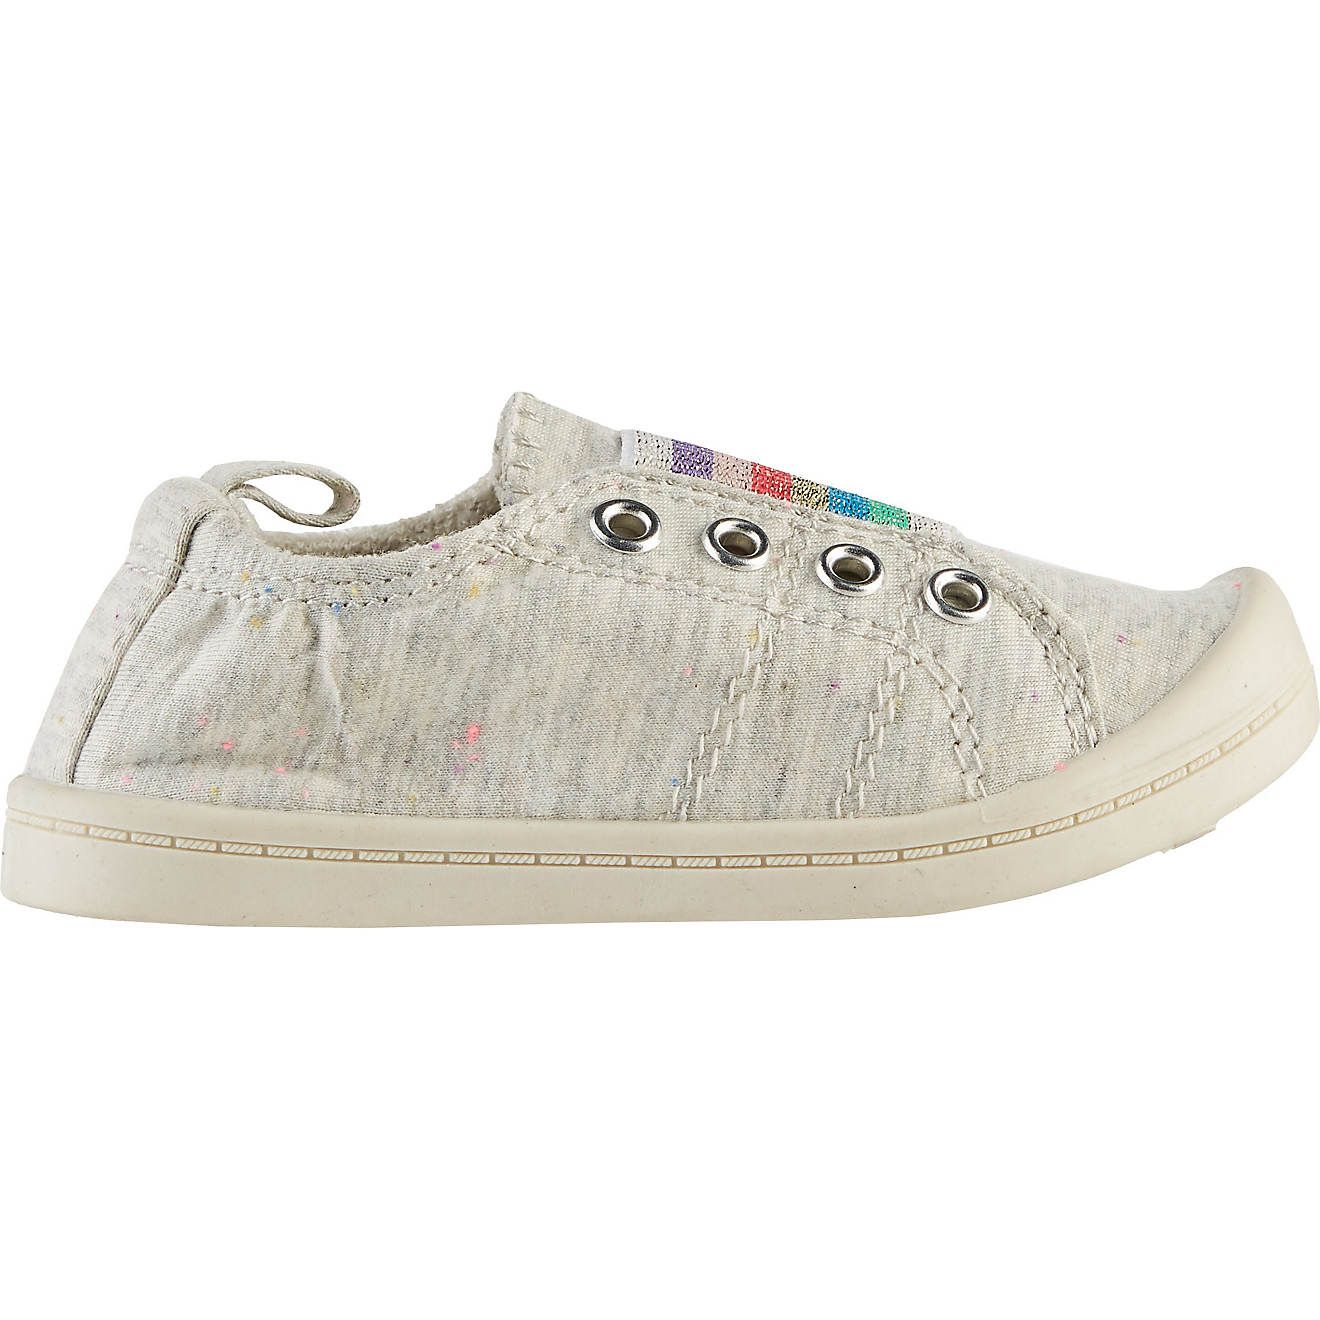 Austin Trading Co. Toddler Girls' Emma Casual Shoes | Academy Sports + Outdoor Affiliate